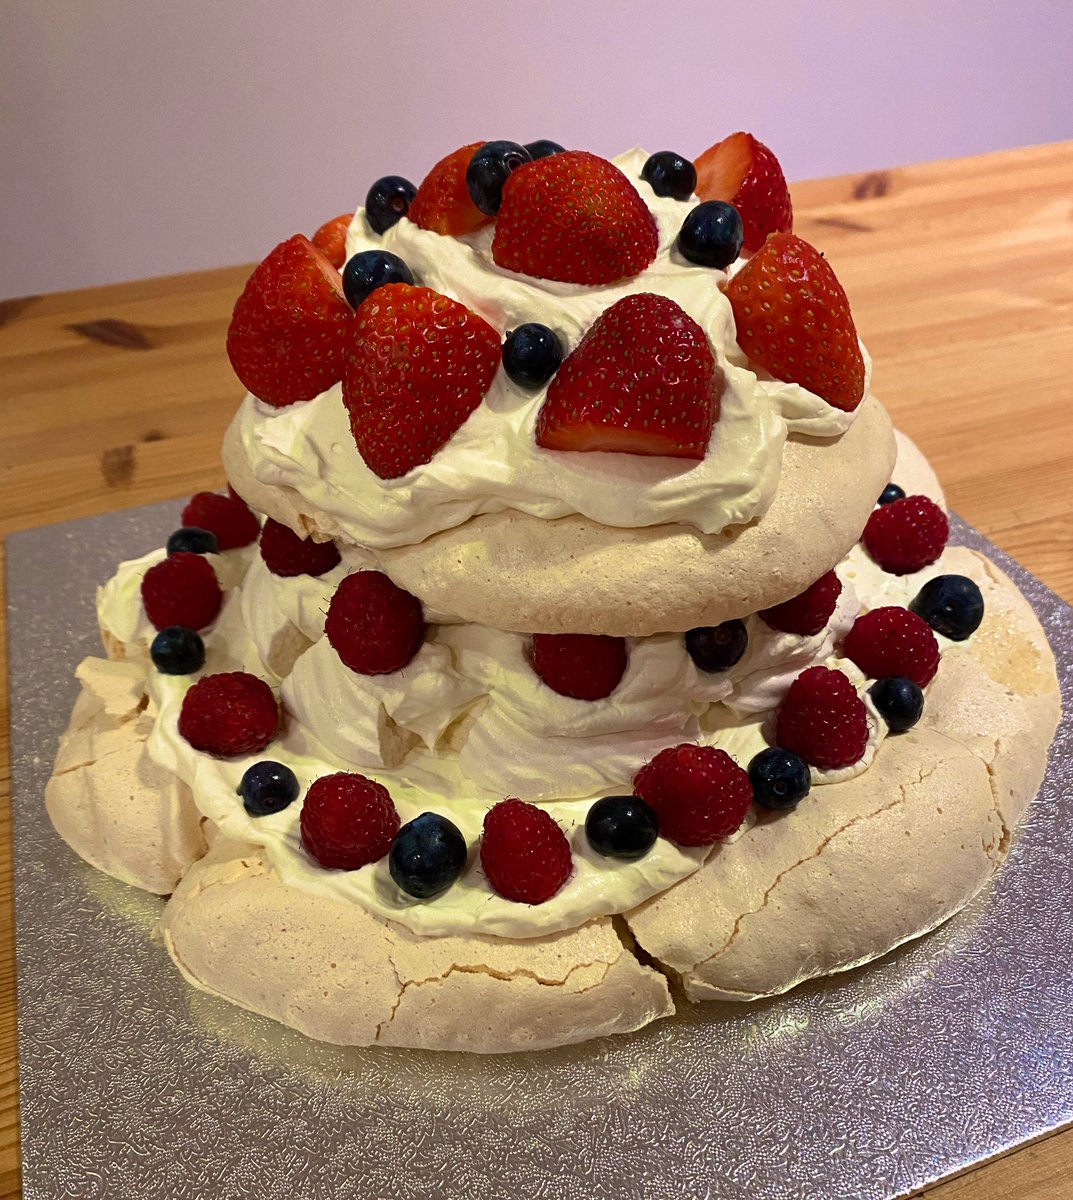 Behold my pavlova creation for New Year’s Eve! Many tiers (and many tears) later & here we are 🎉